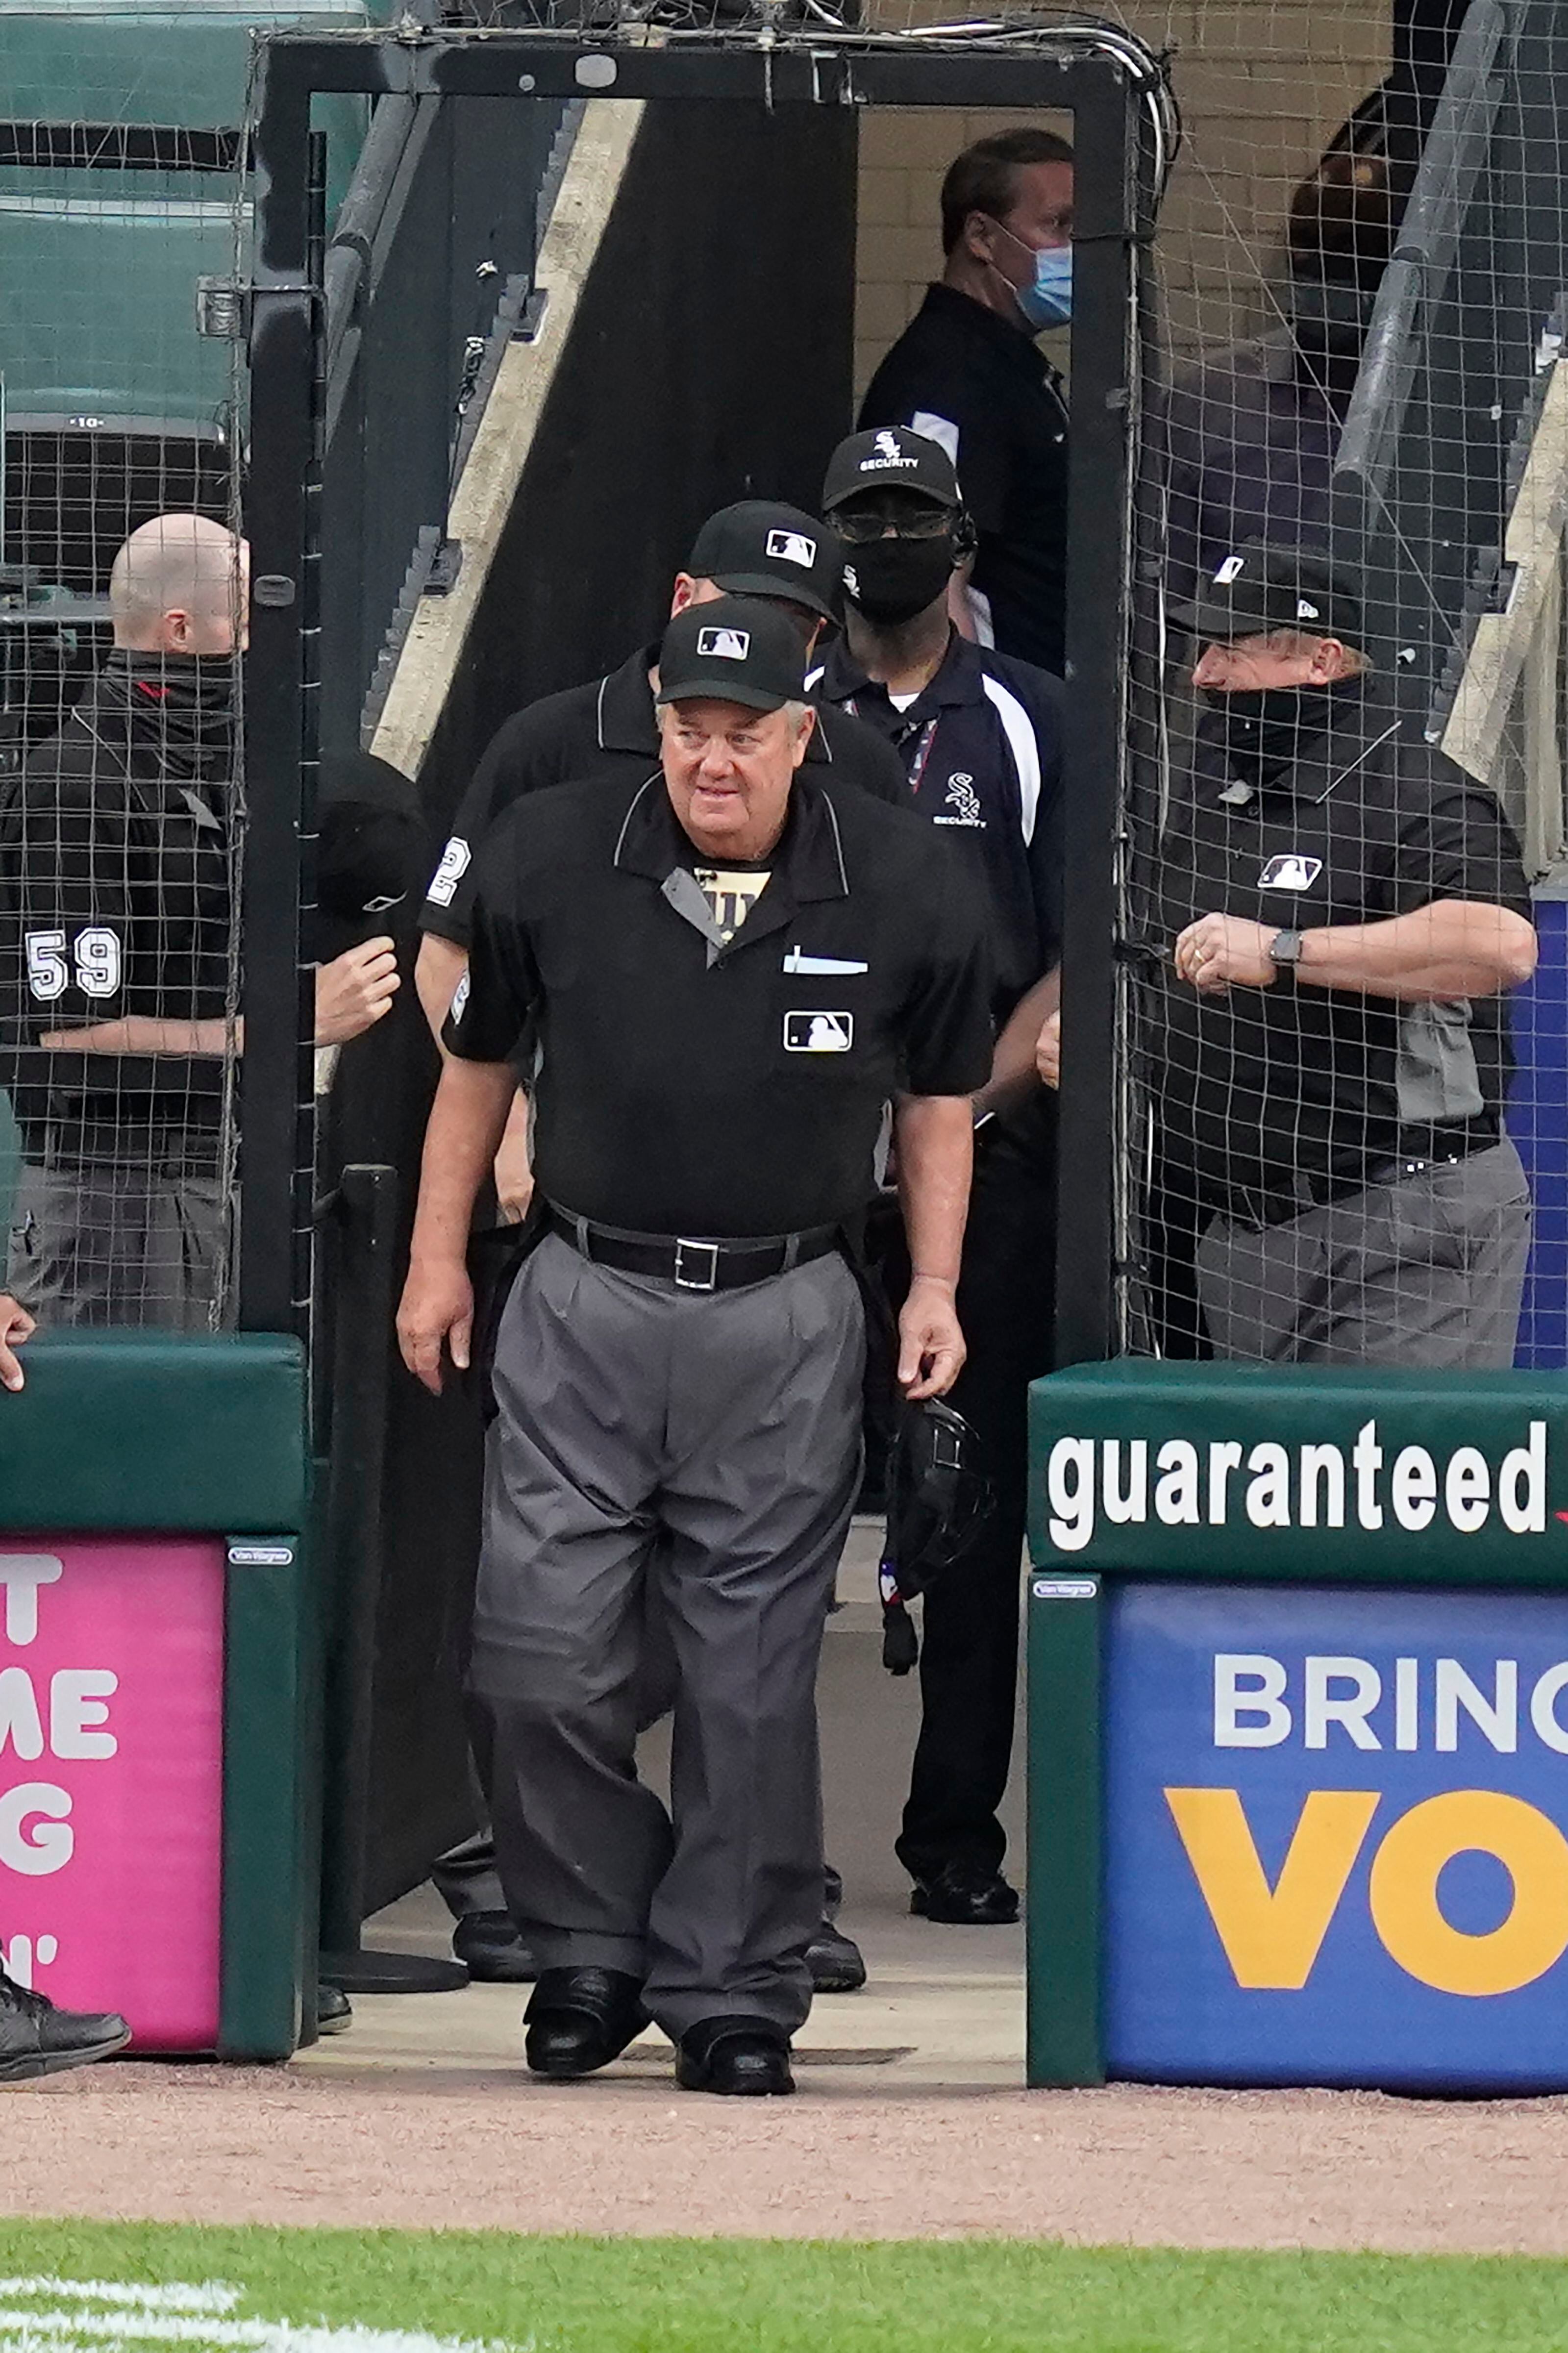 Joe West to Attend Halloween Party as Promiscuous Umpire